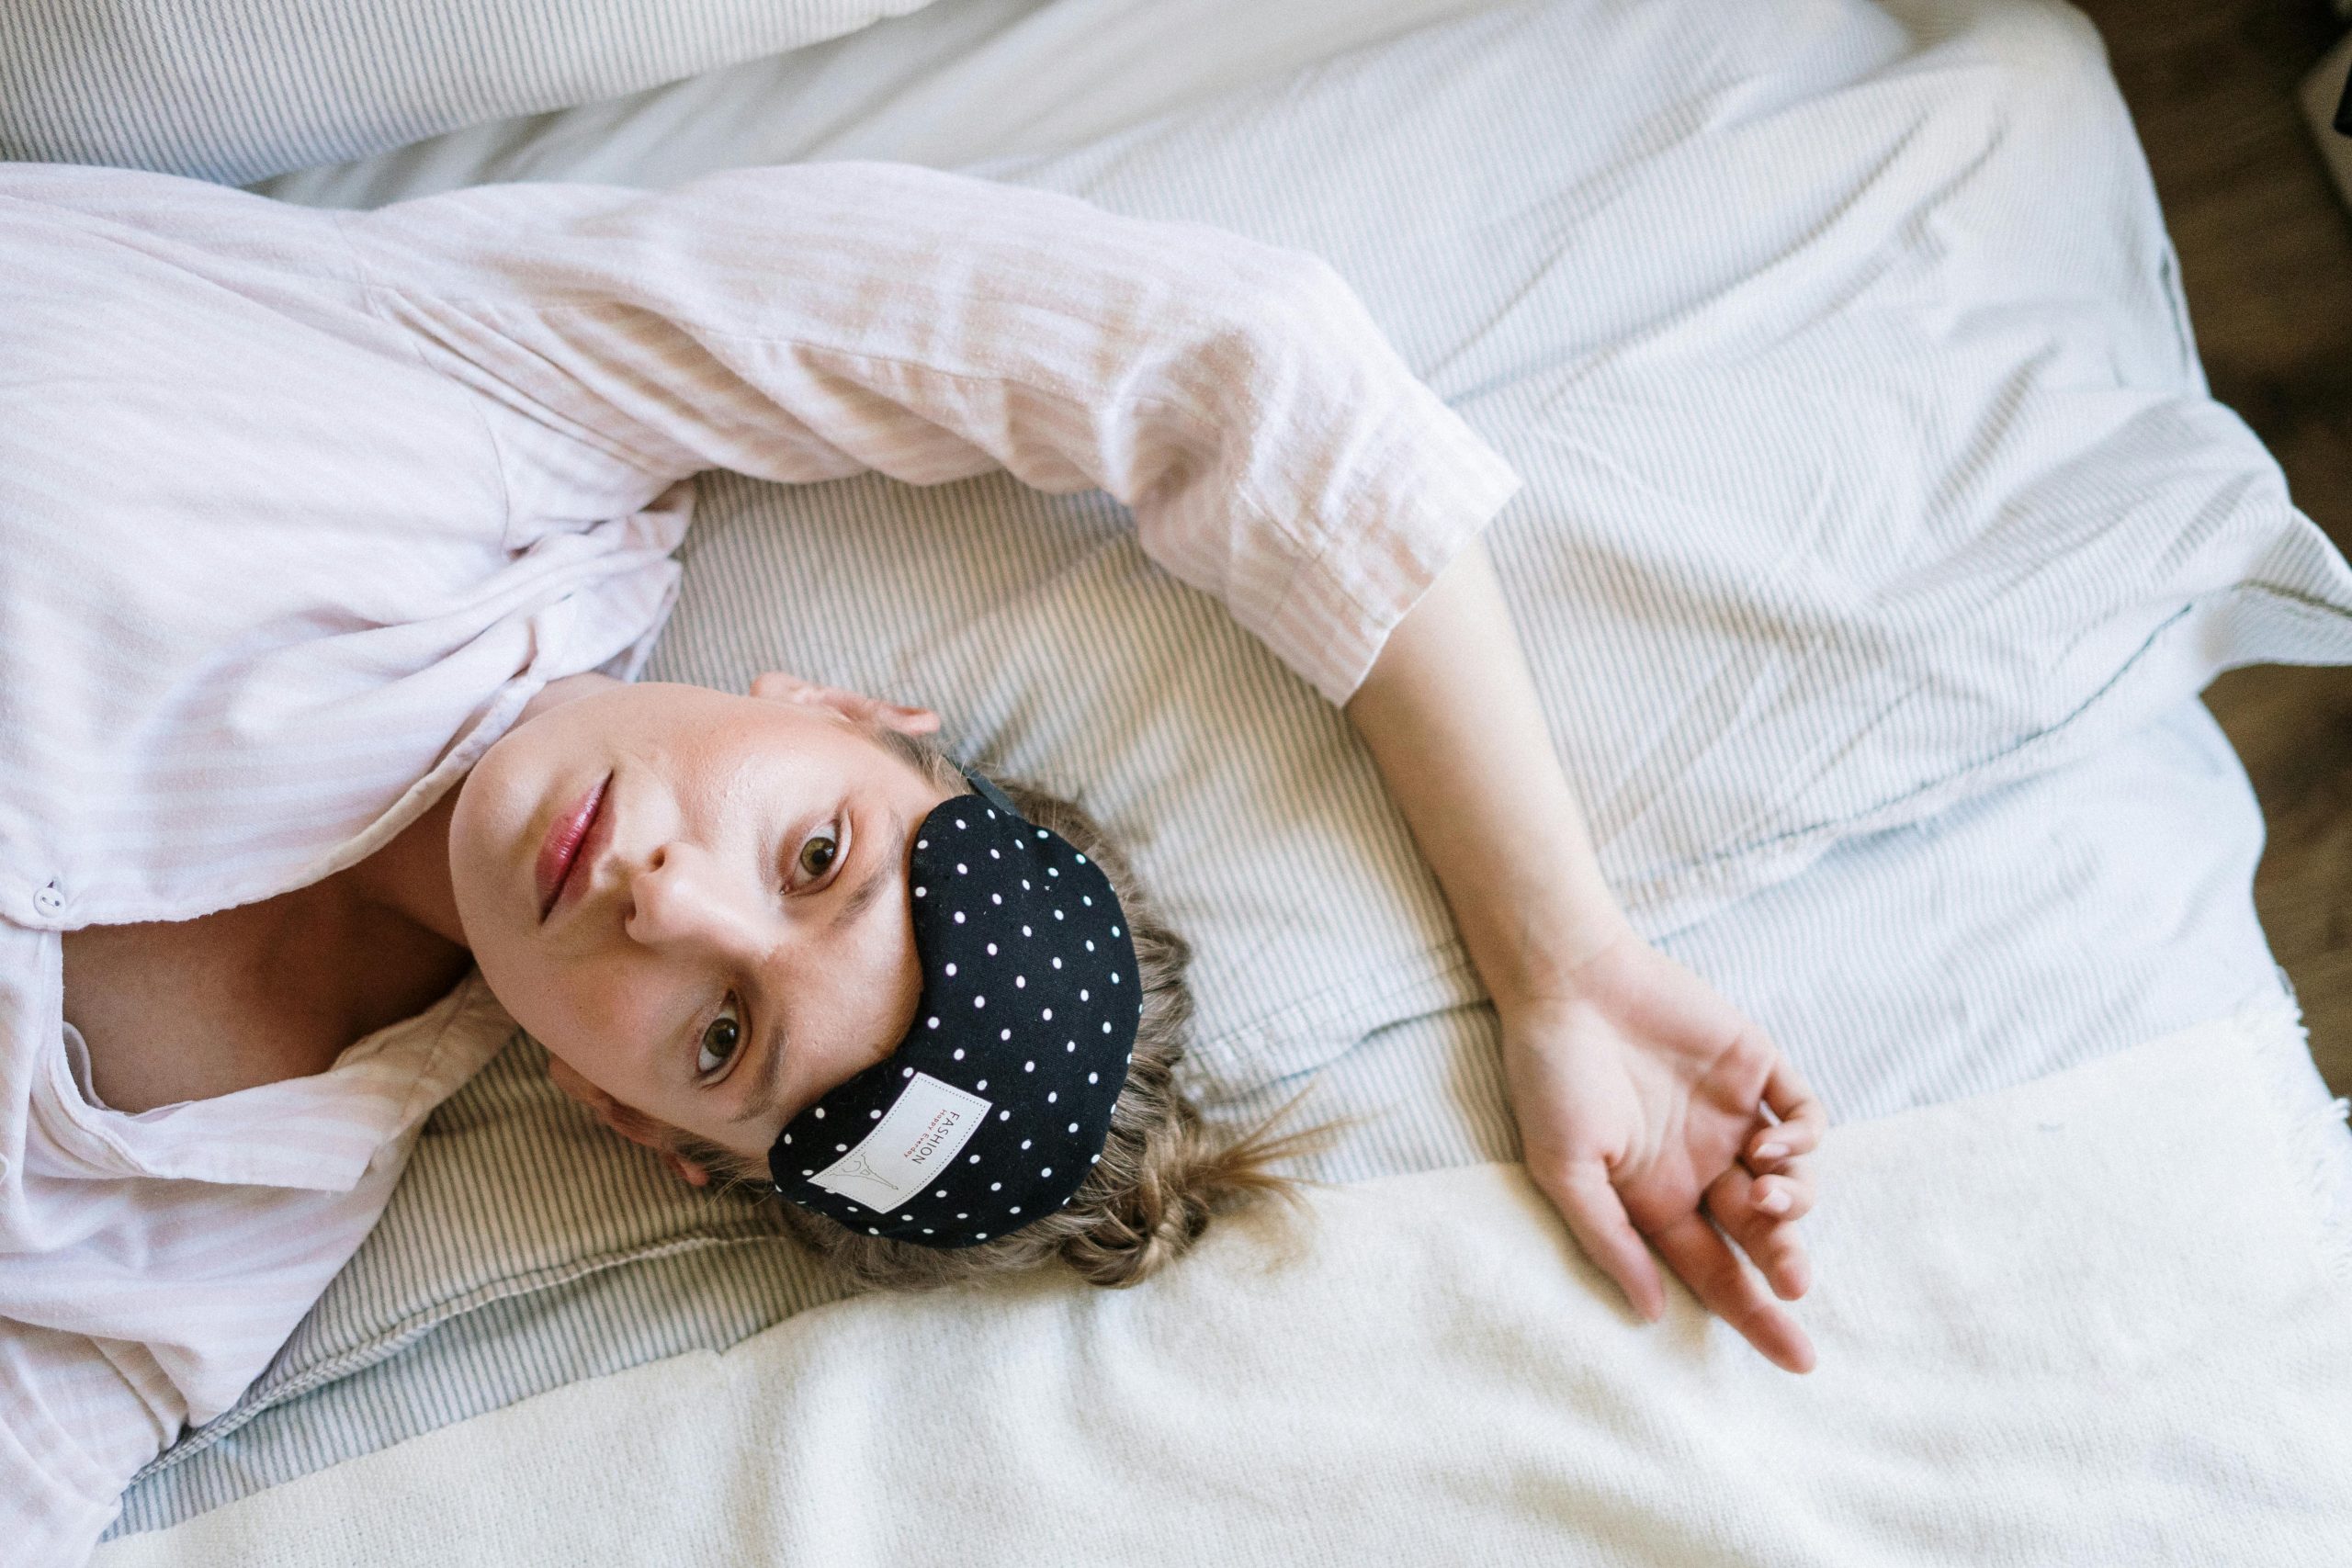 Sleep: woman wide awake in bed with eye mask pushed up on forehead